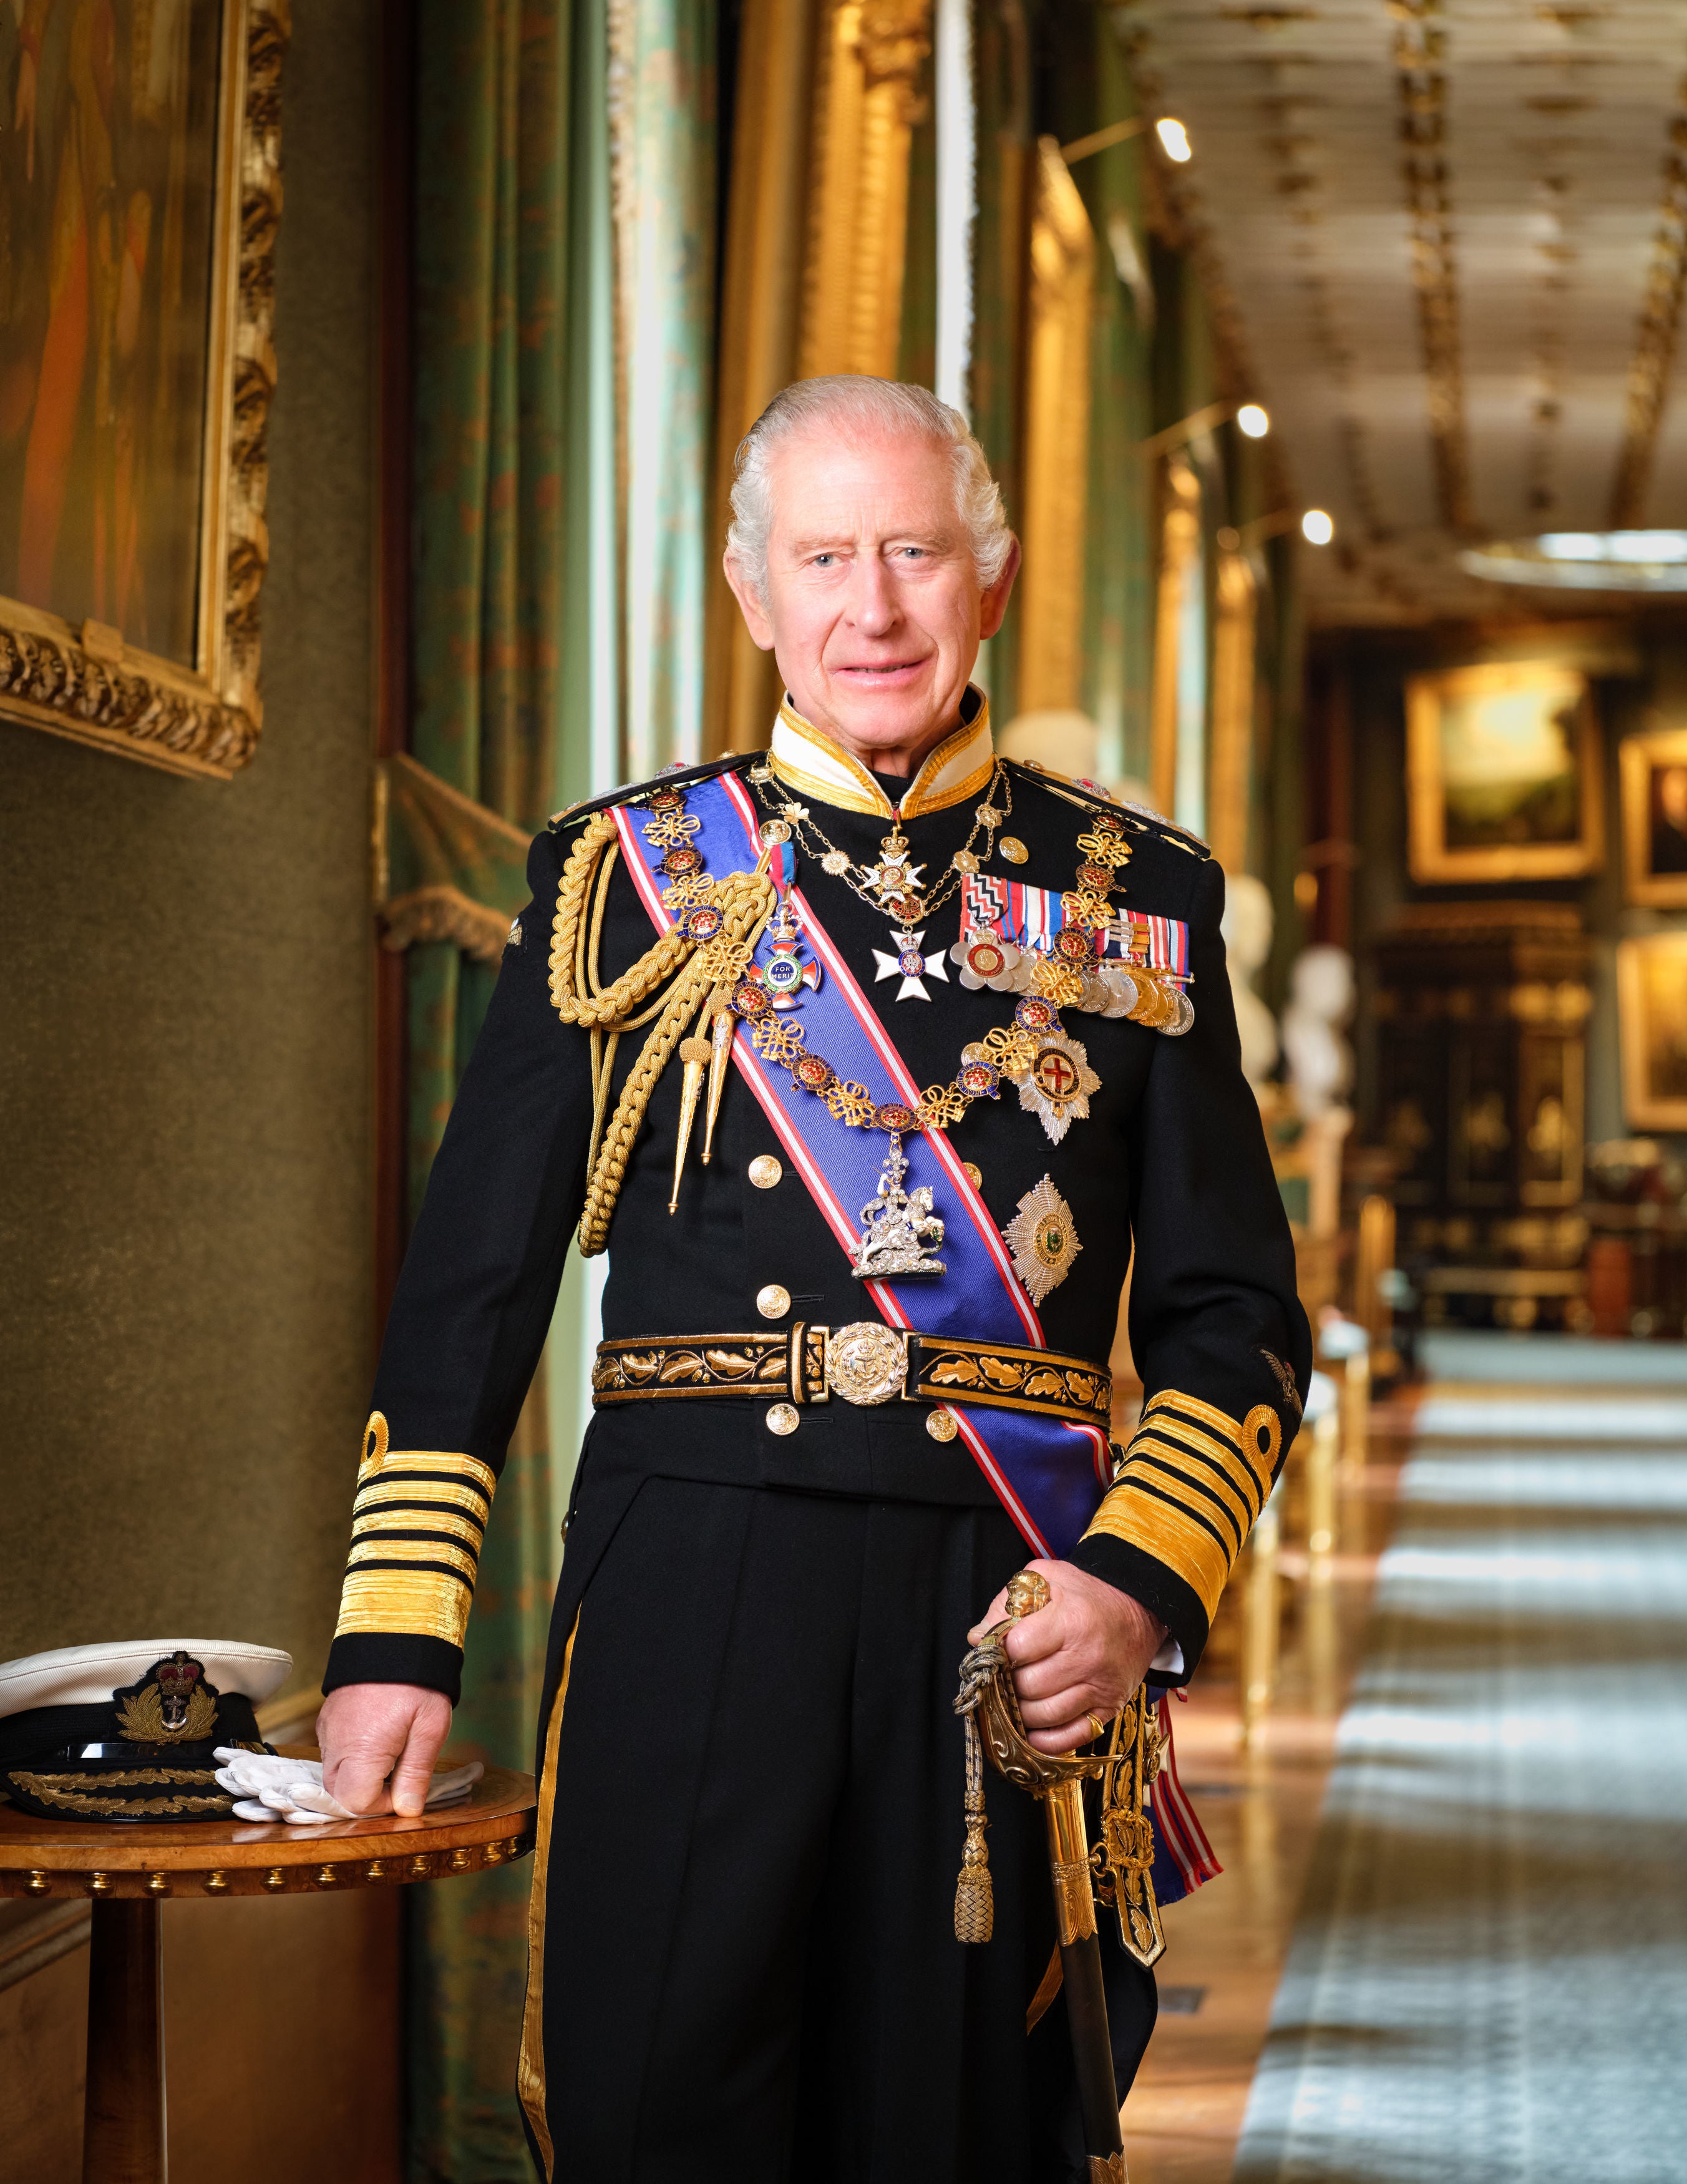 The King’s wealth grew by ten million in the last year